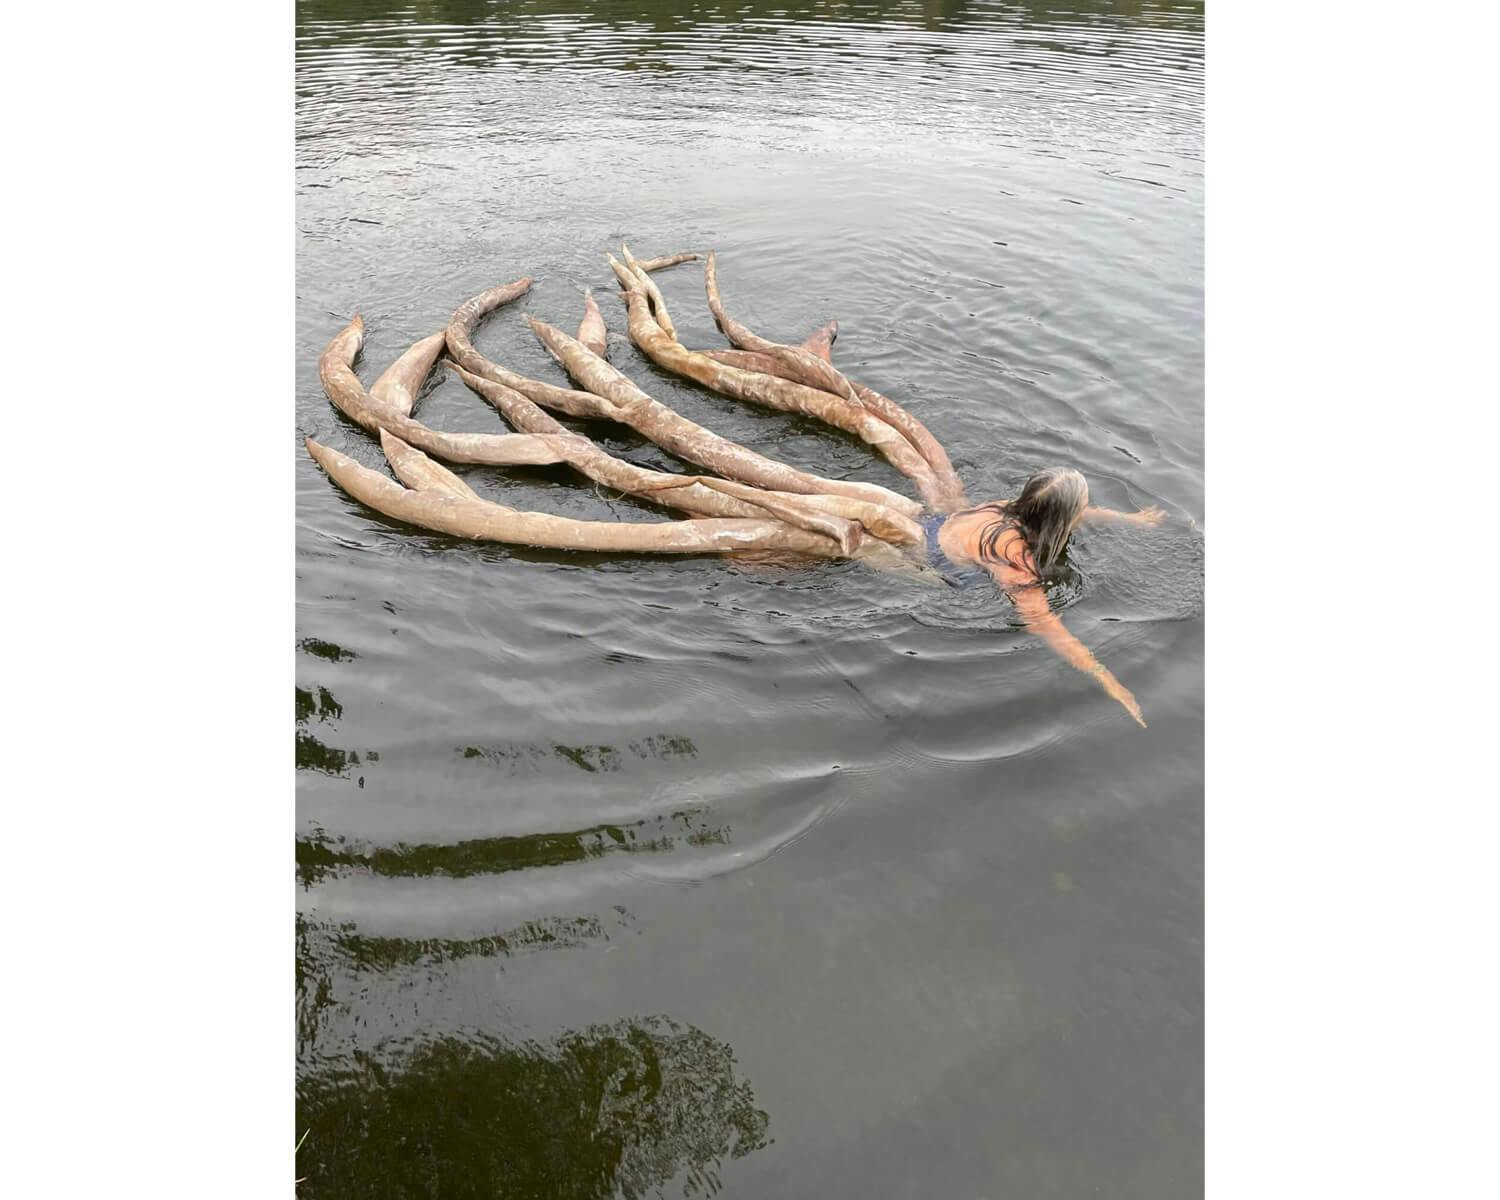 A woman with tentacles swims in the water in Caroline Bagenal's image.